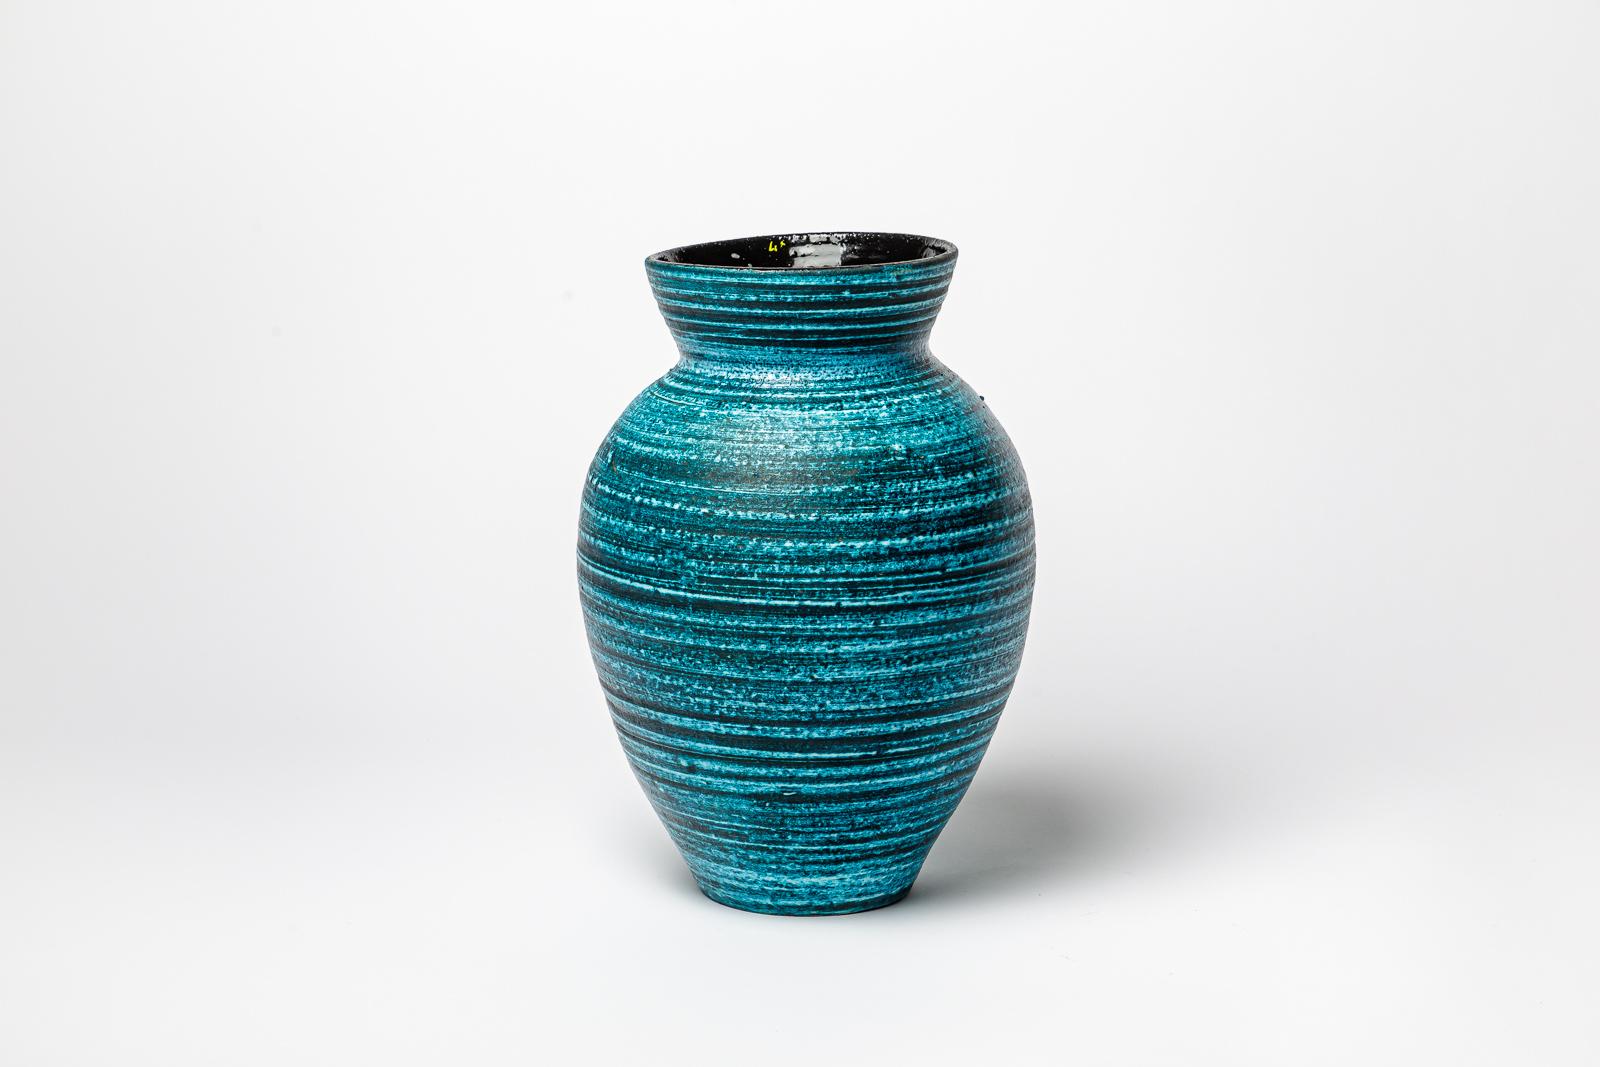 Blue glazed ceramic vase by Accolay.
Artist signature under the base. Circa 1960-1970. 
H : 12.9’ x 8.3’ inches.